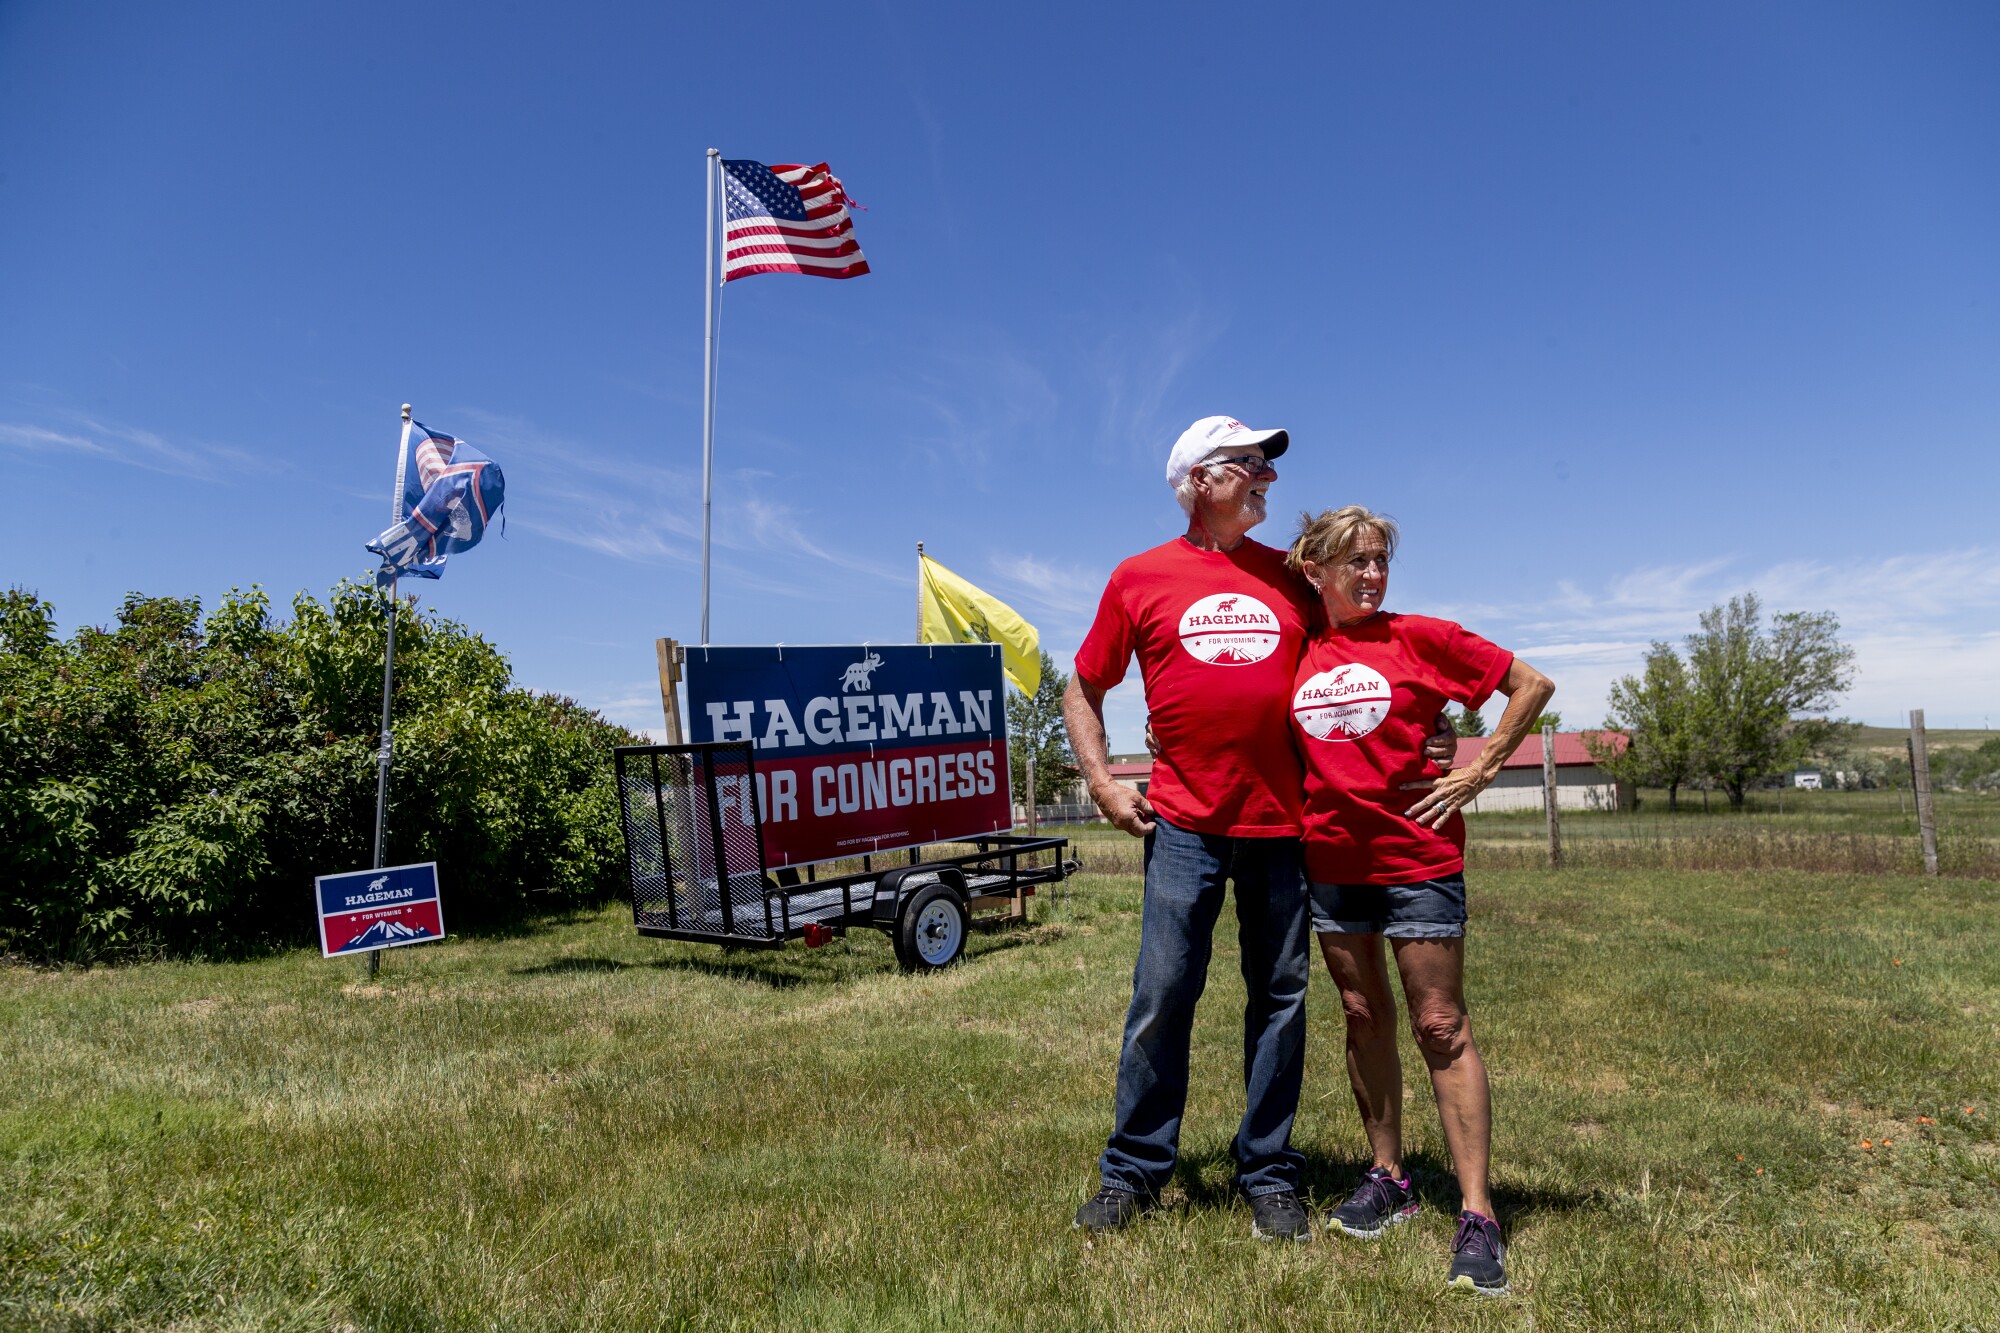 A man and woman in red shirts stand by a "Hageman for Congress" sign